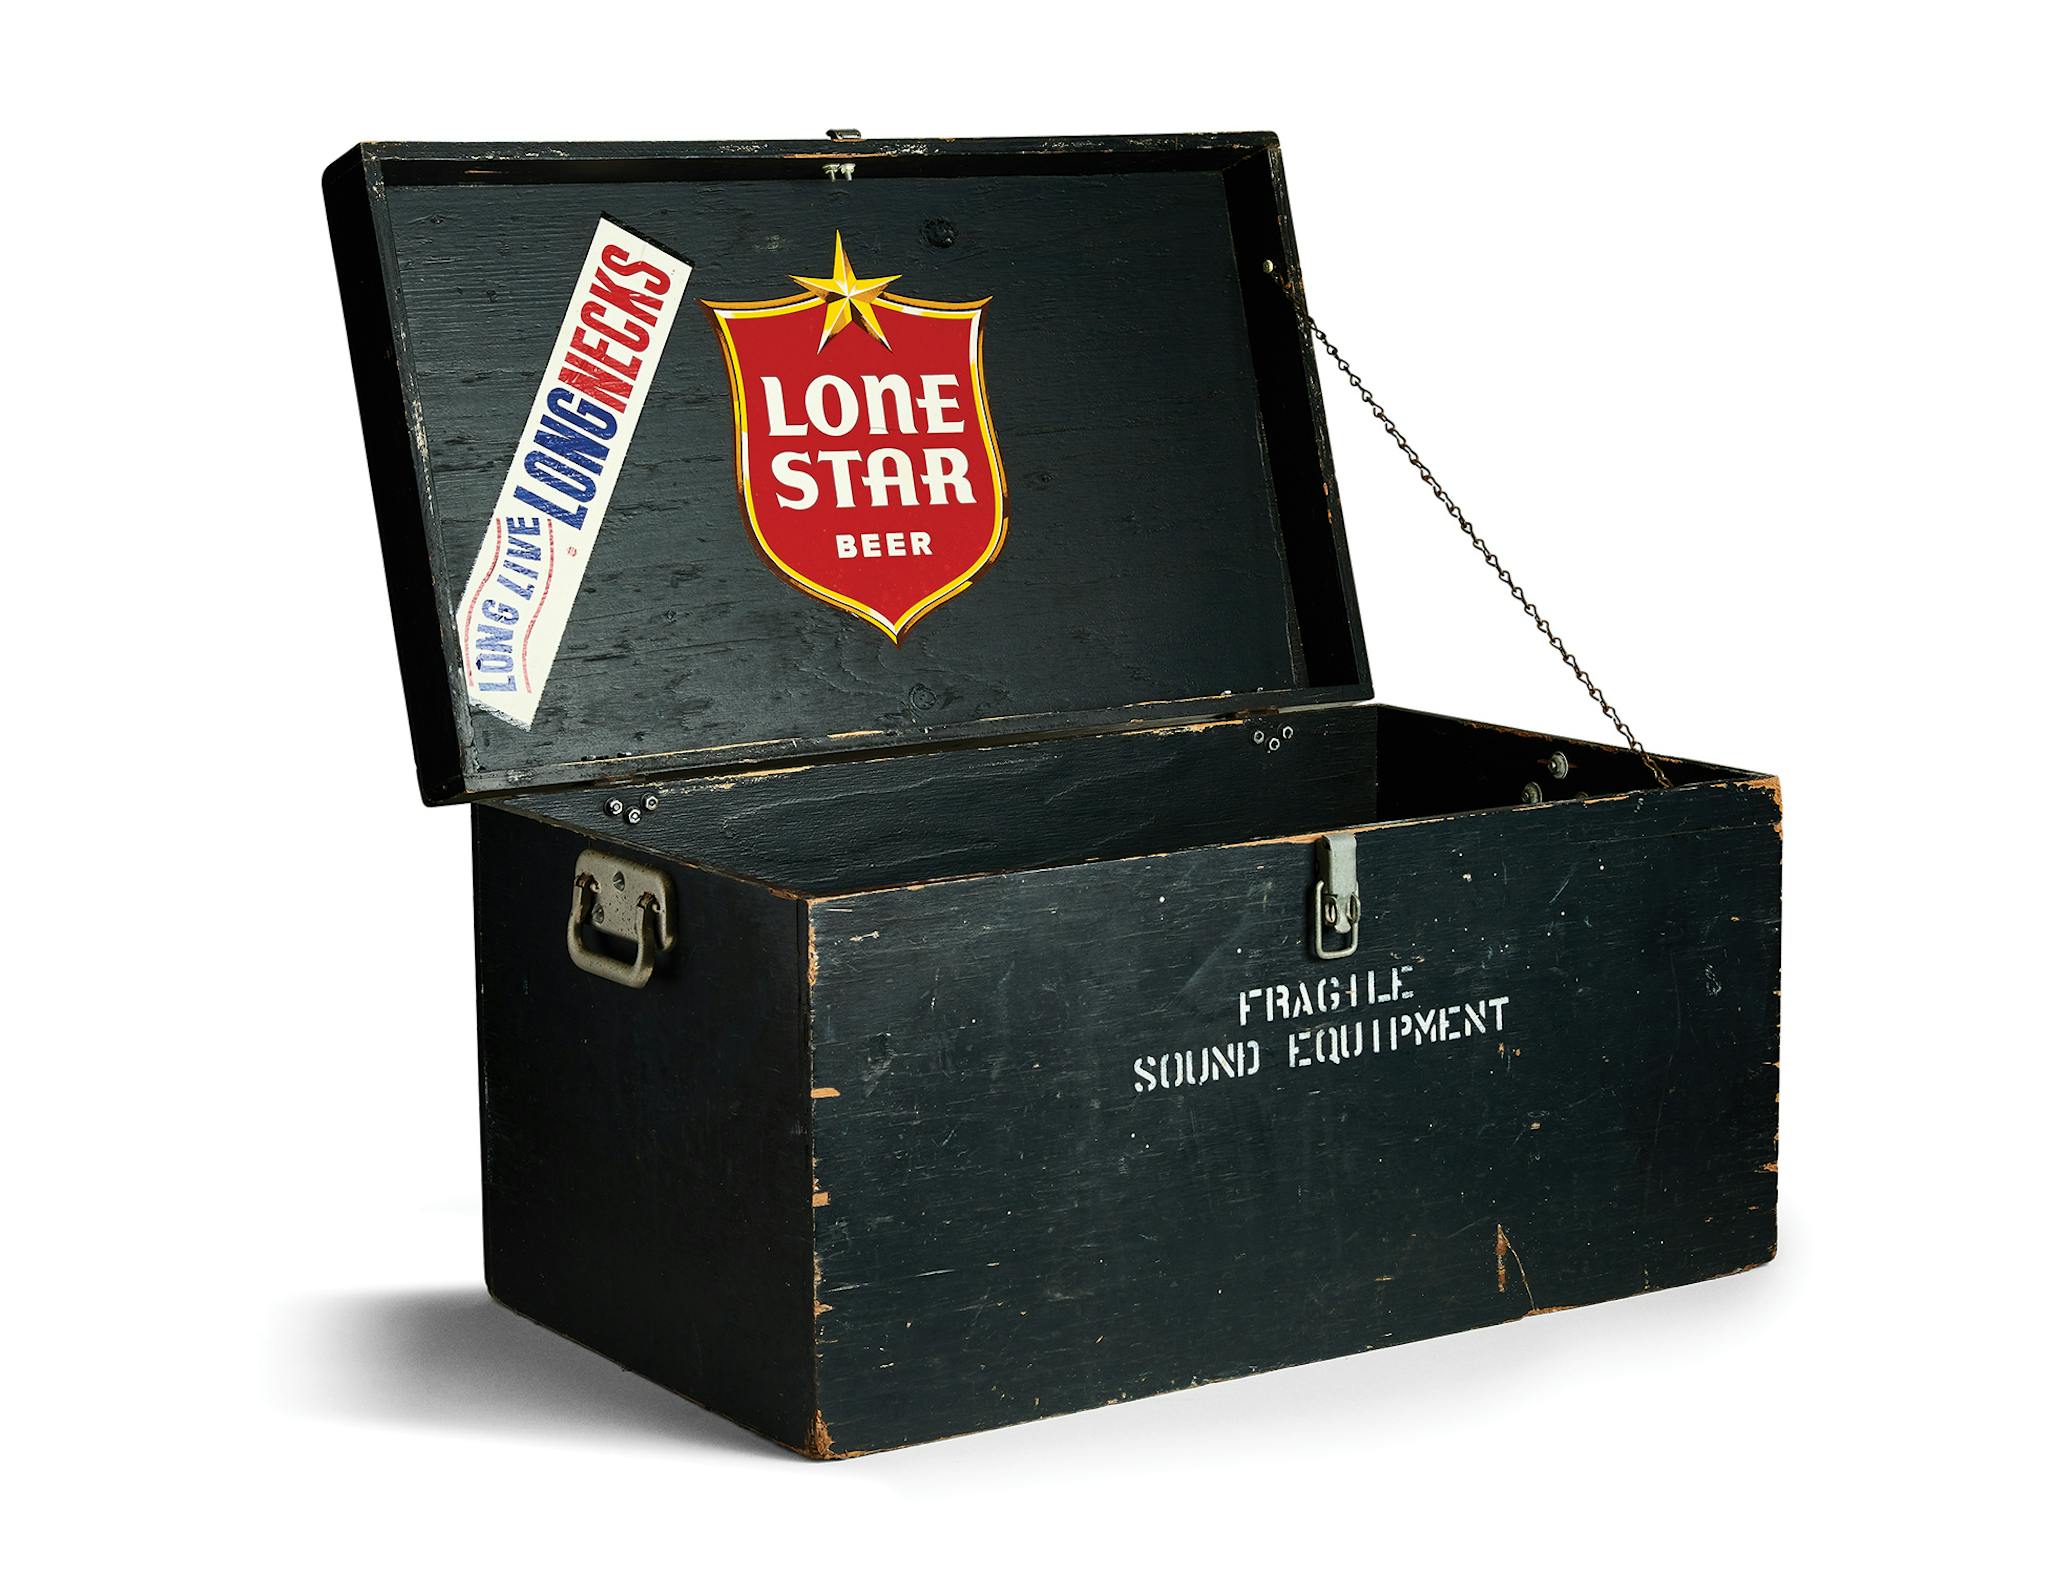 A fake sound equipment box used to sneak Lone Star backstage to Willie.